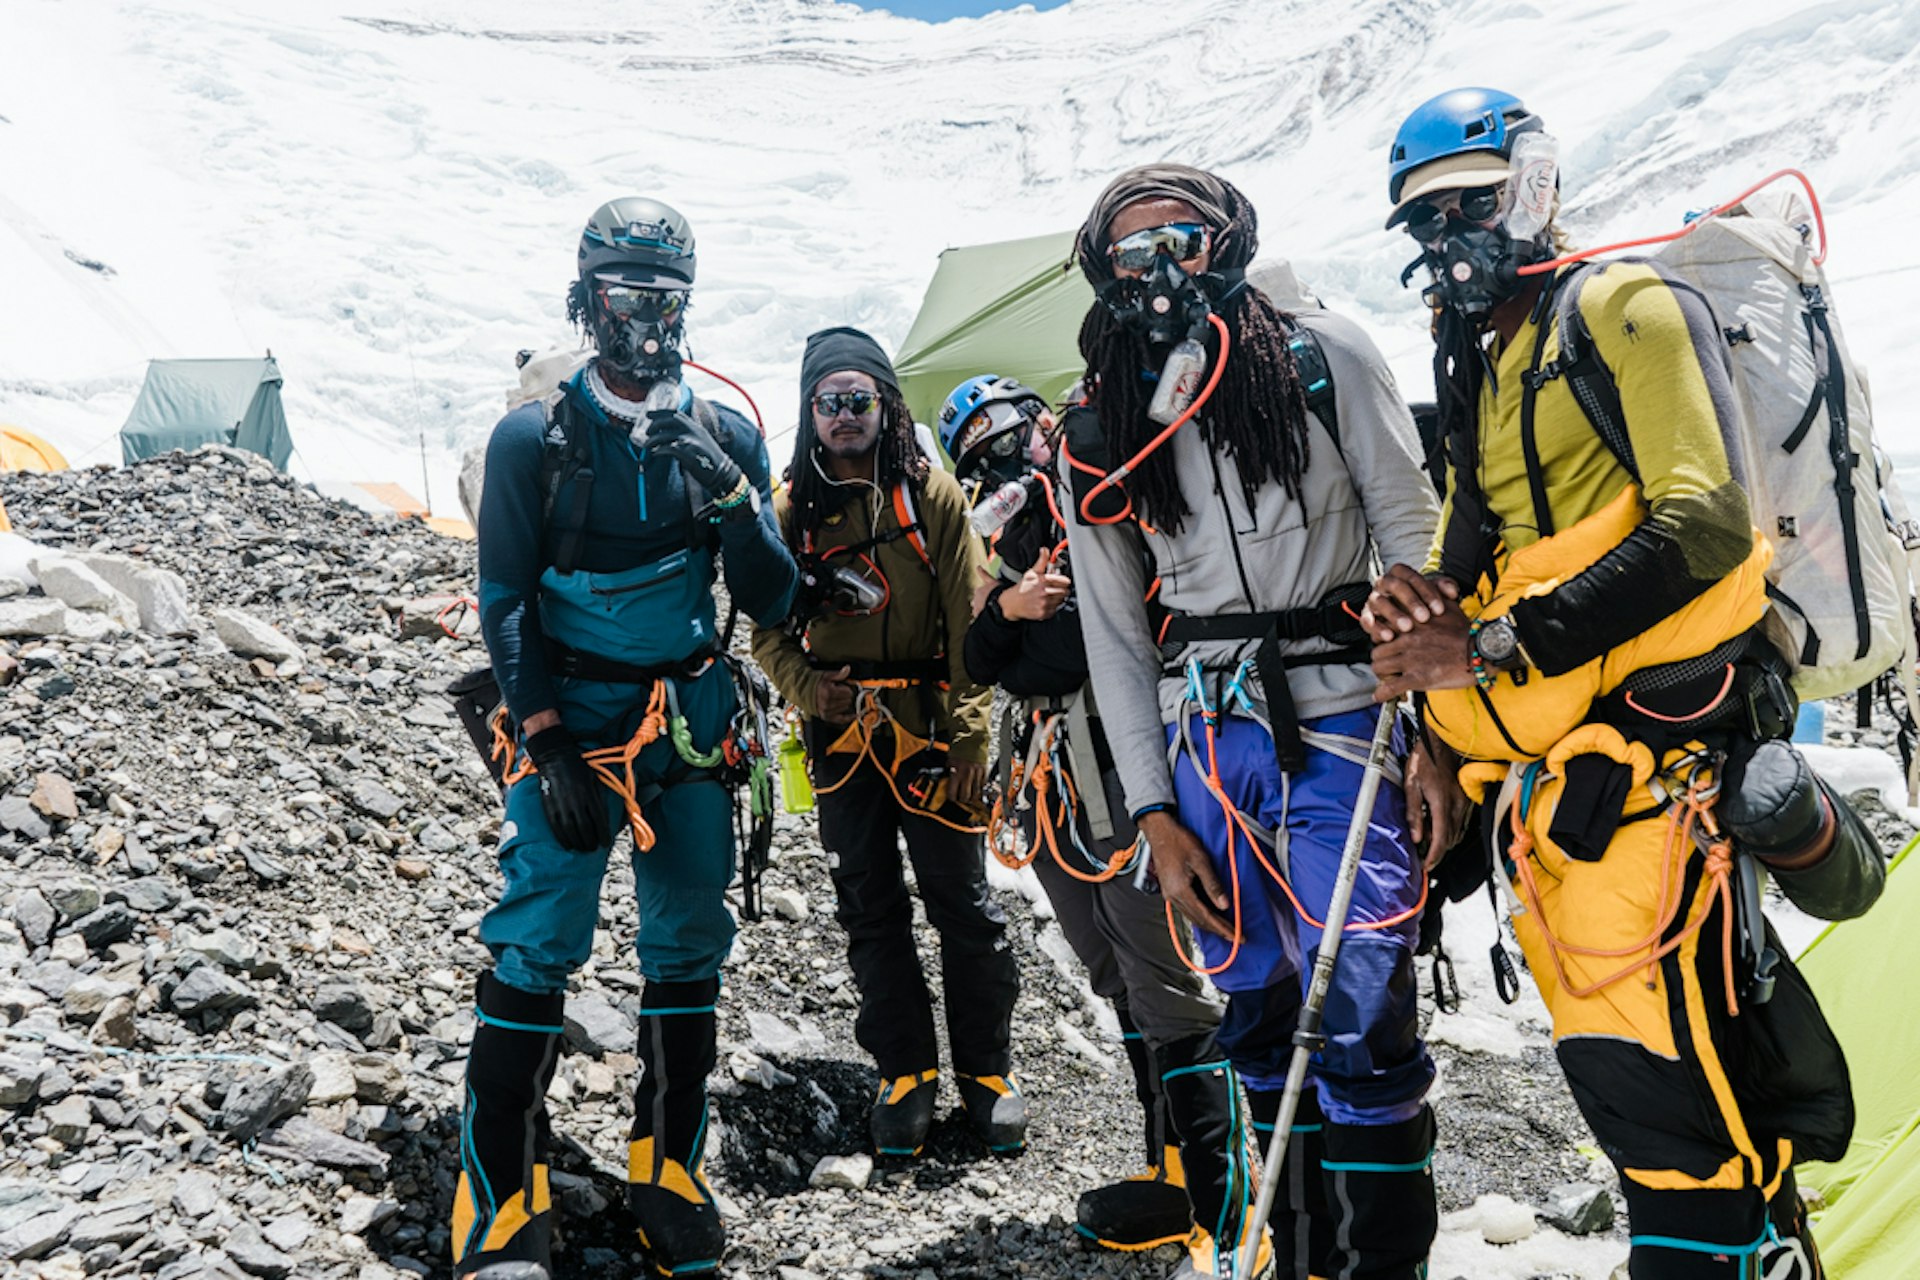 Members of the Full Circle Everest team standing together on rocky ground during the summit climb 